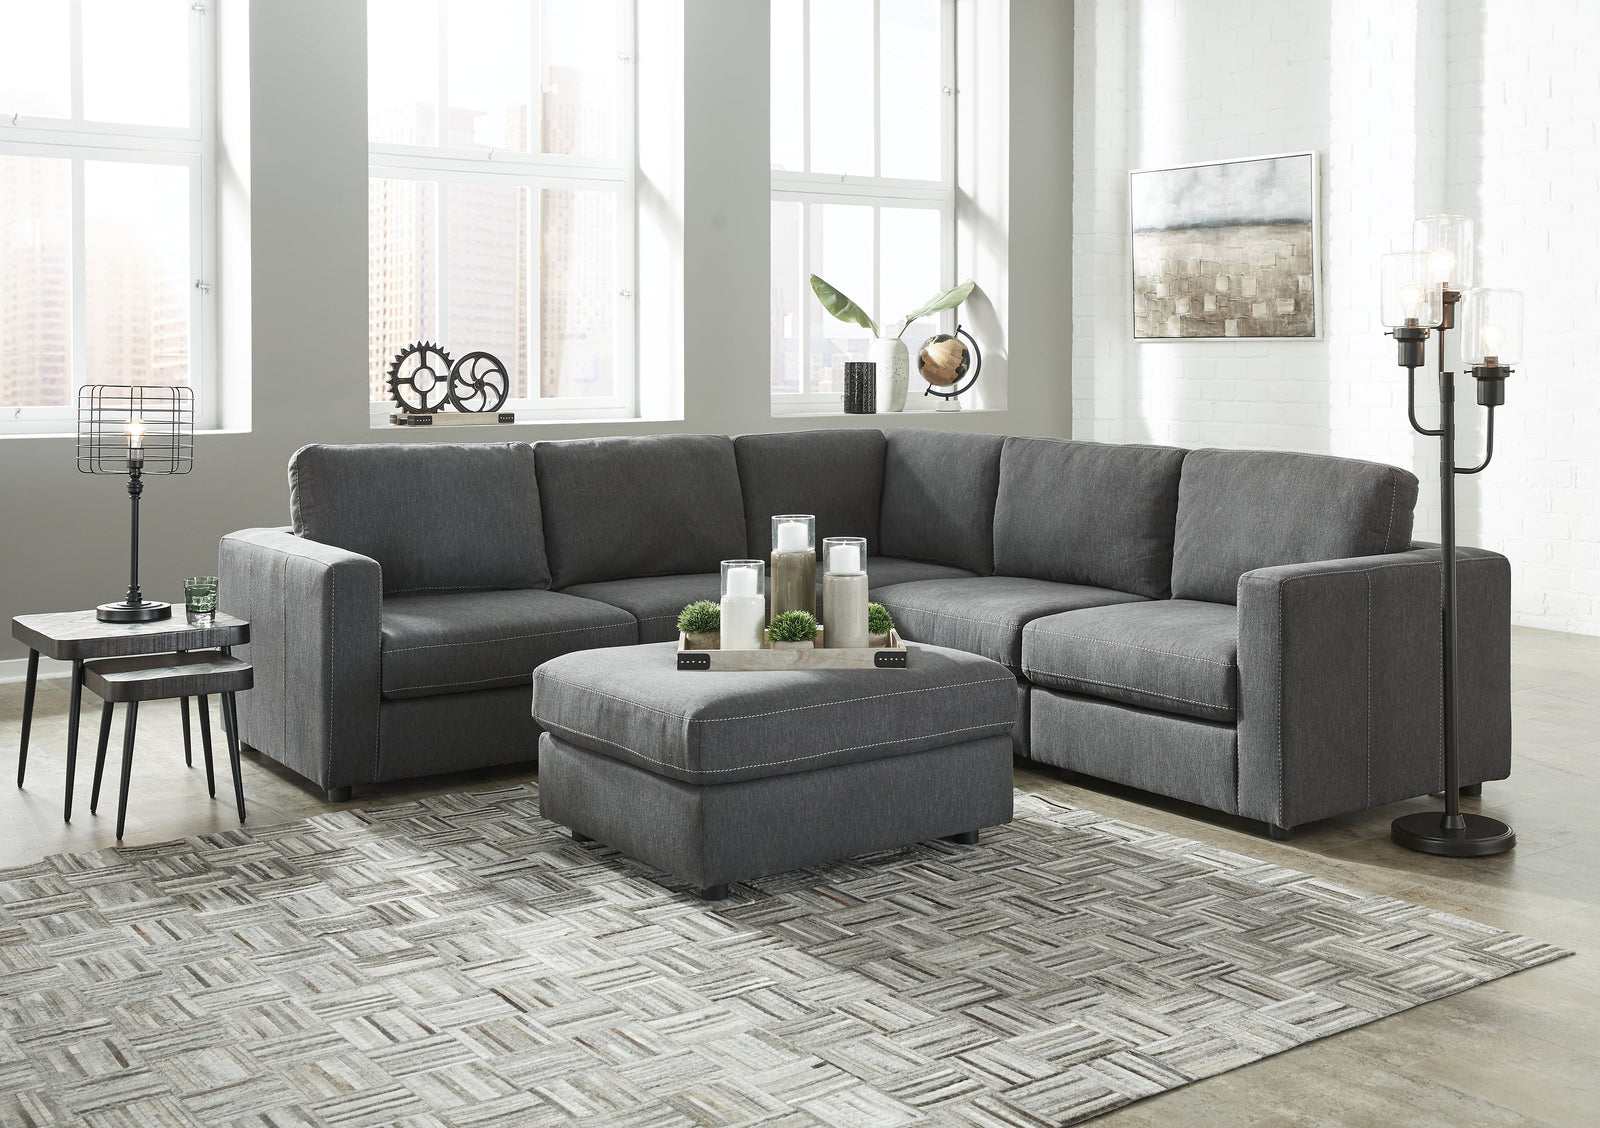 Candela Charcoal 5-Piece Sectional With Ottoman